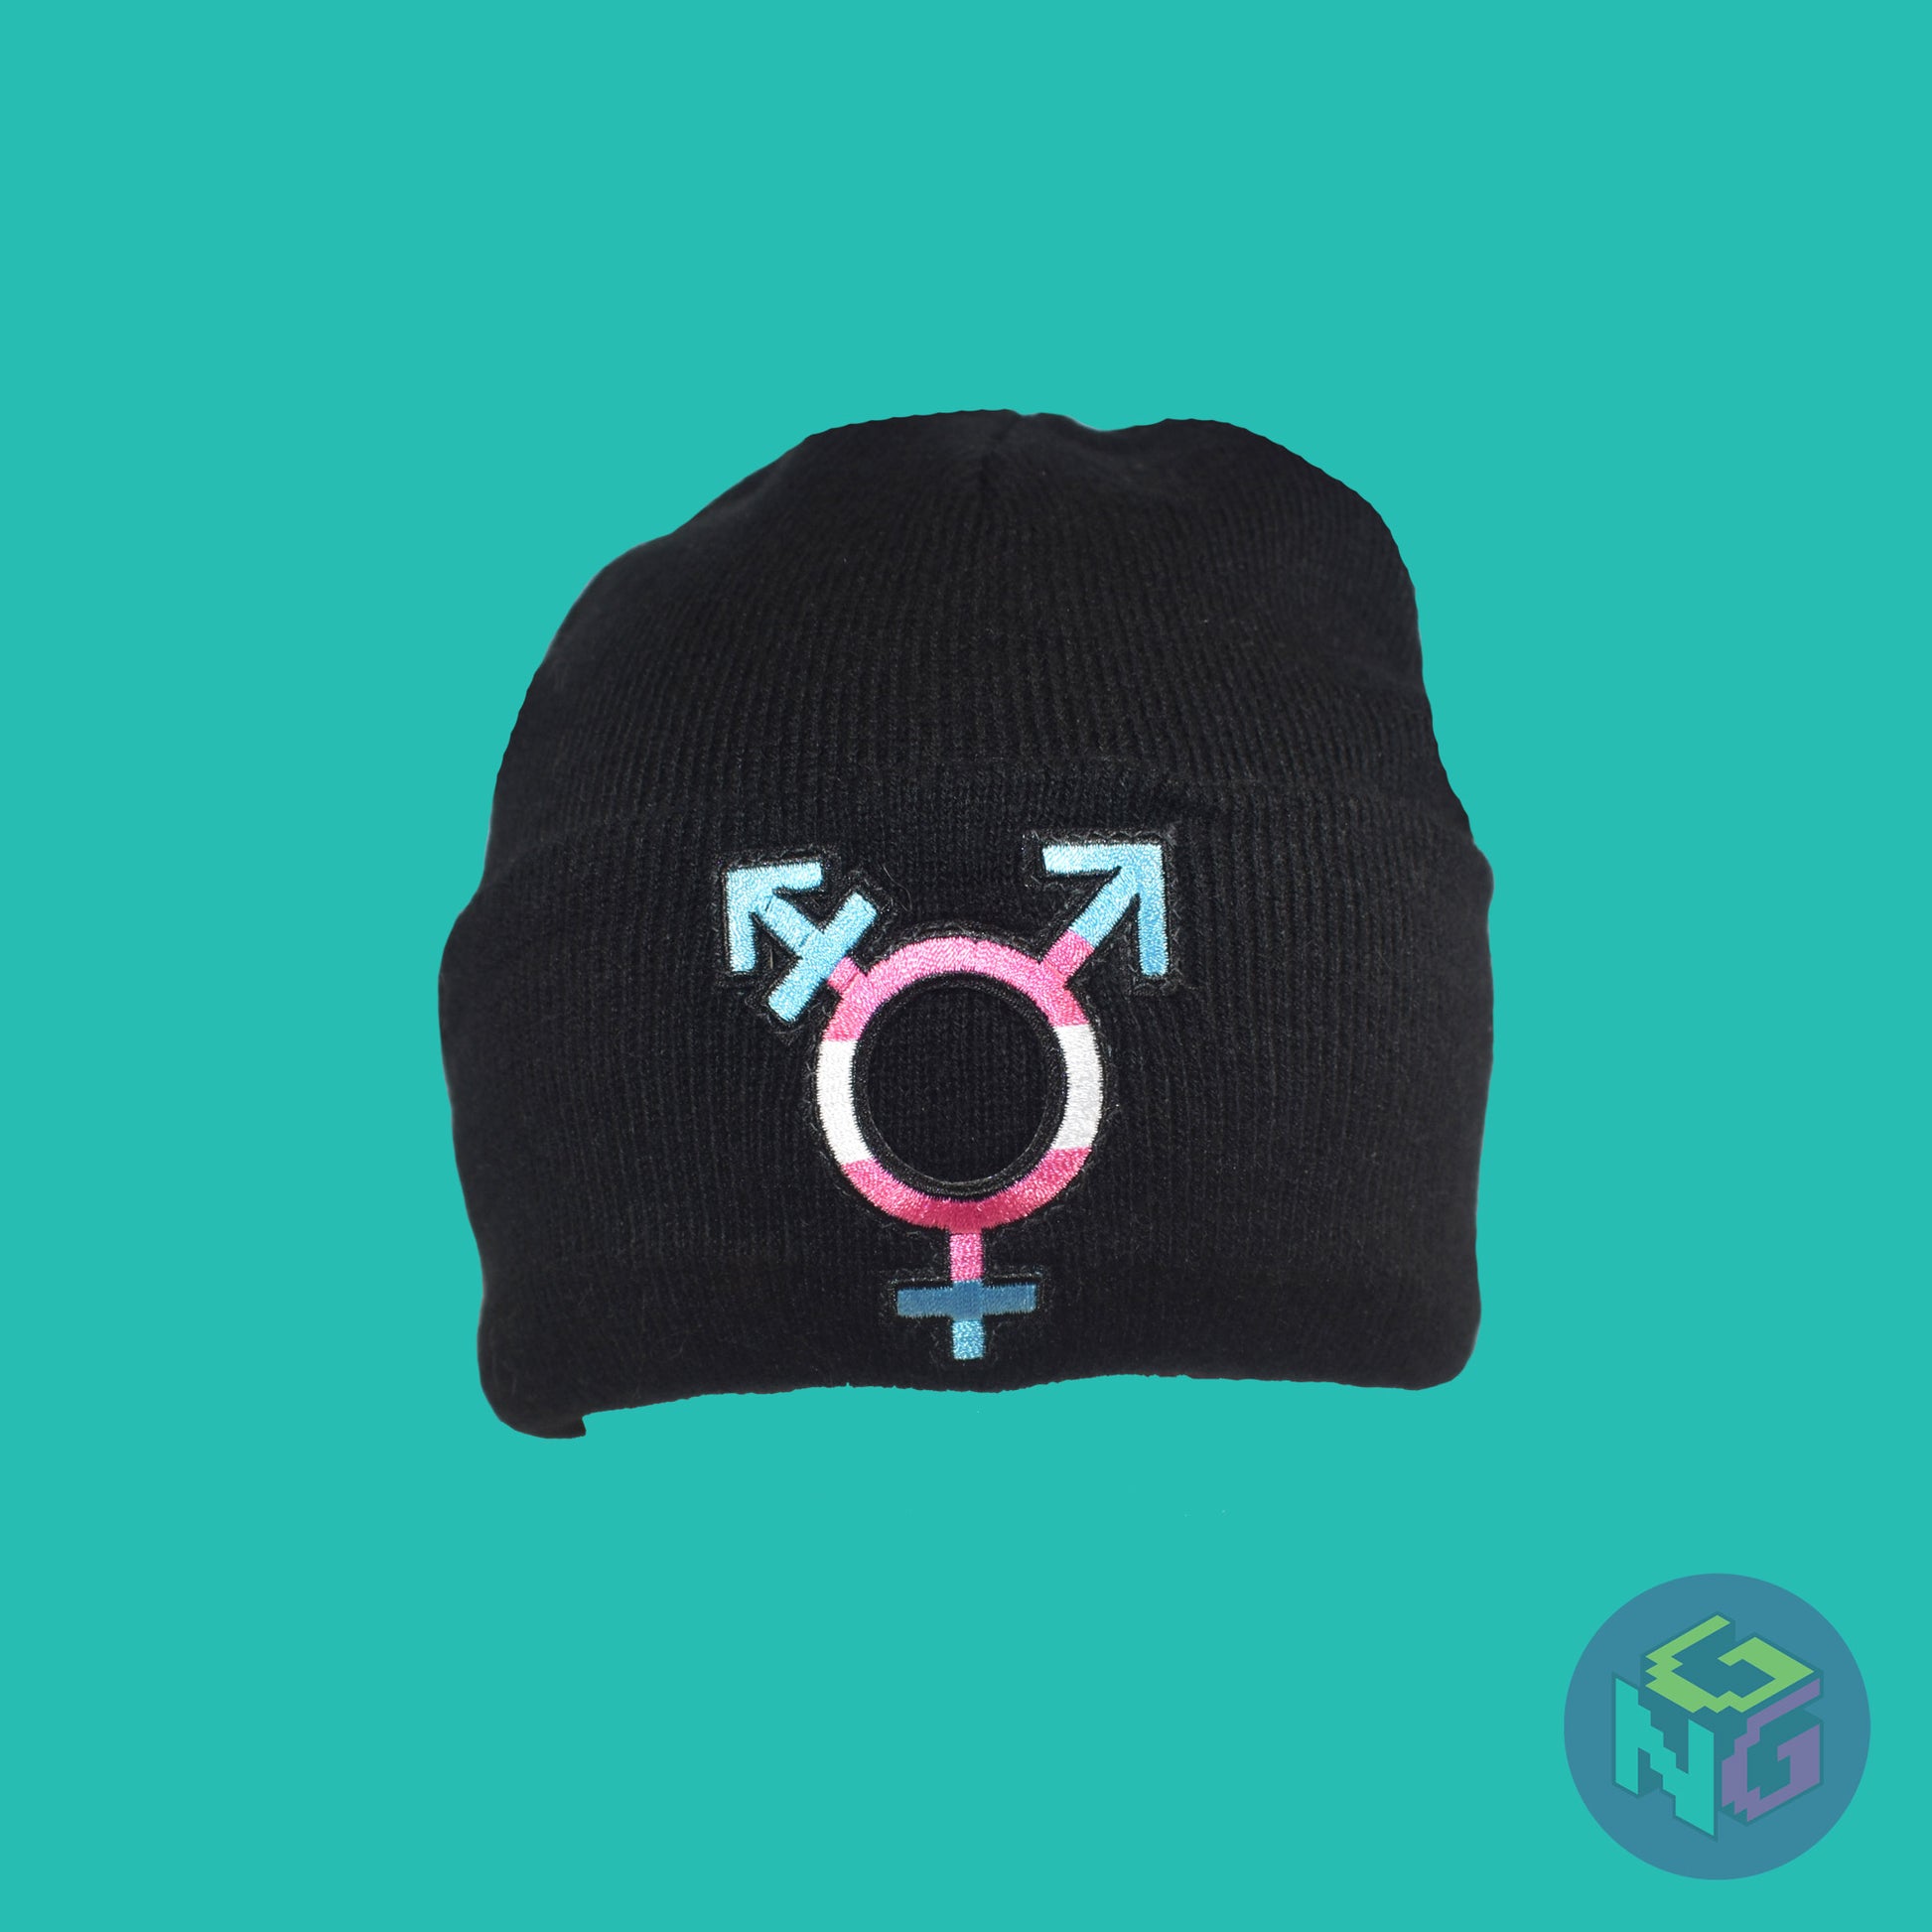 Black knit fabric beanie with the transgender symbol in blue, pink, and white on the front. It is stretched facing front on a mint green background